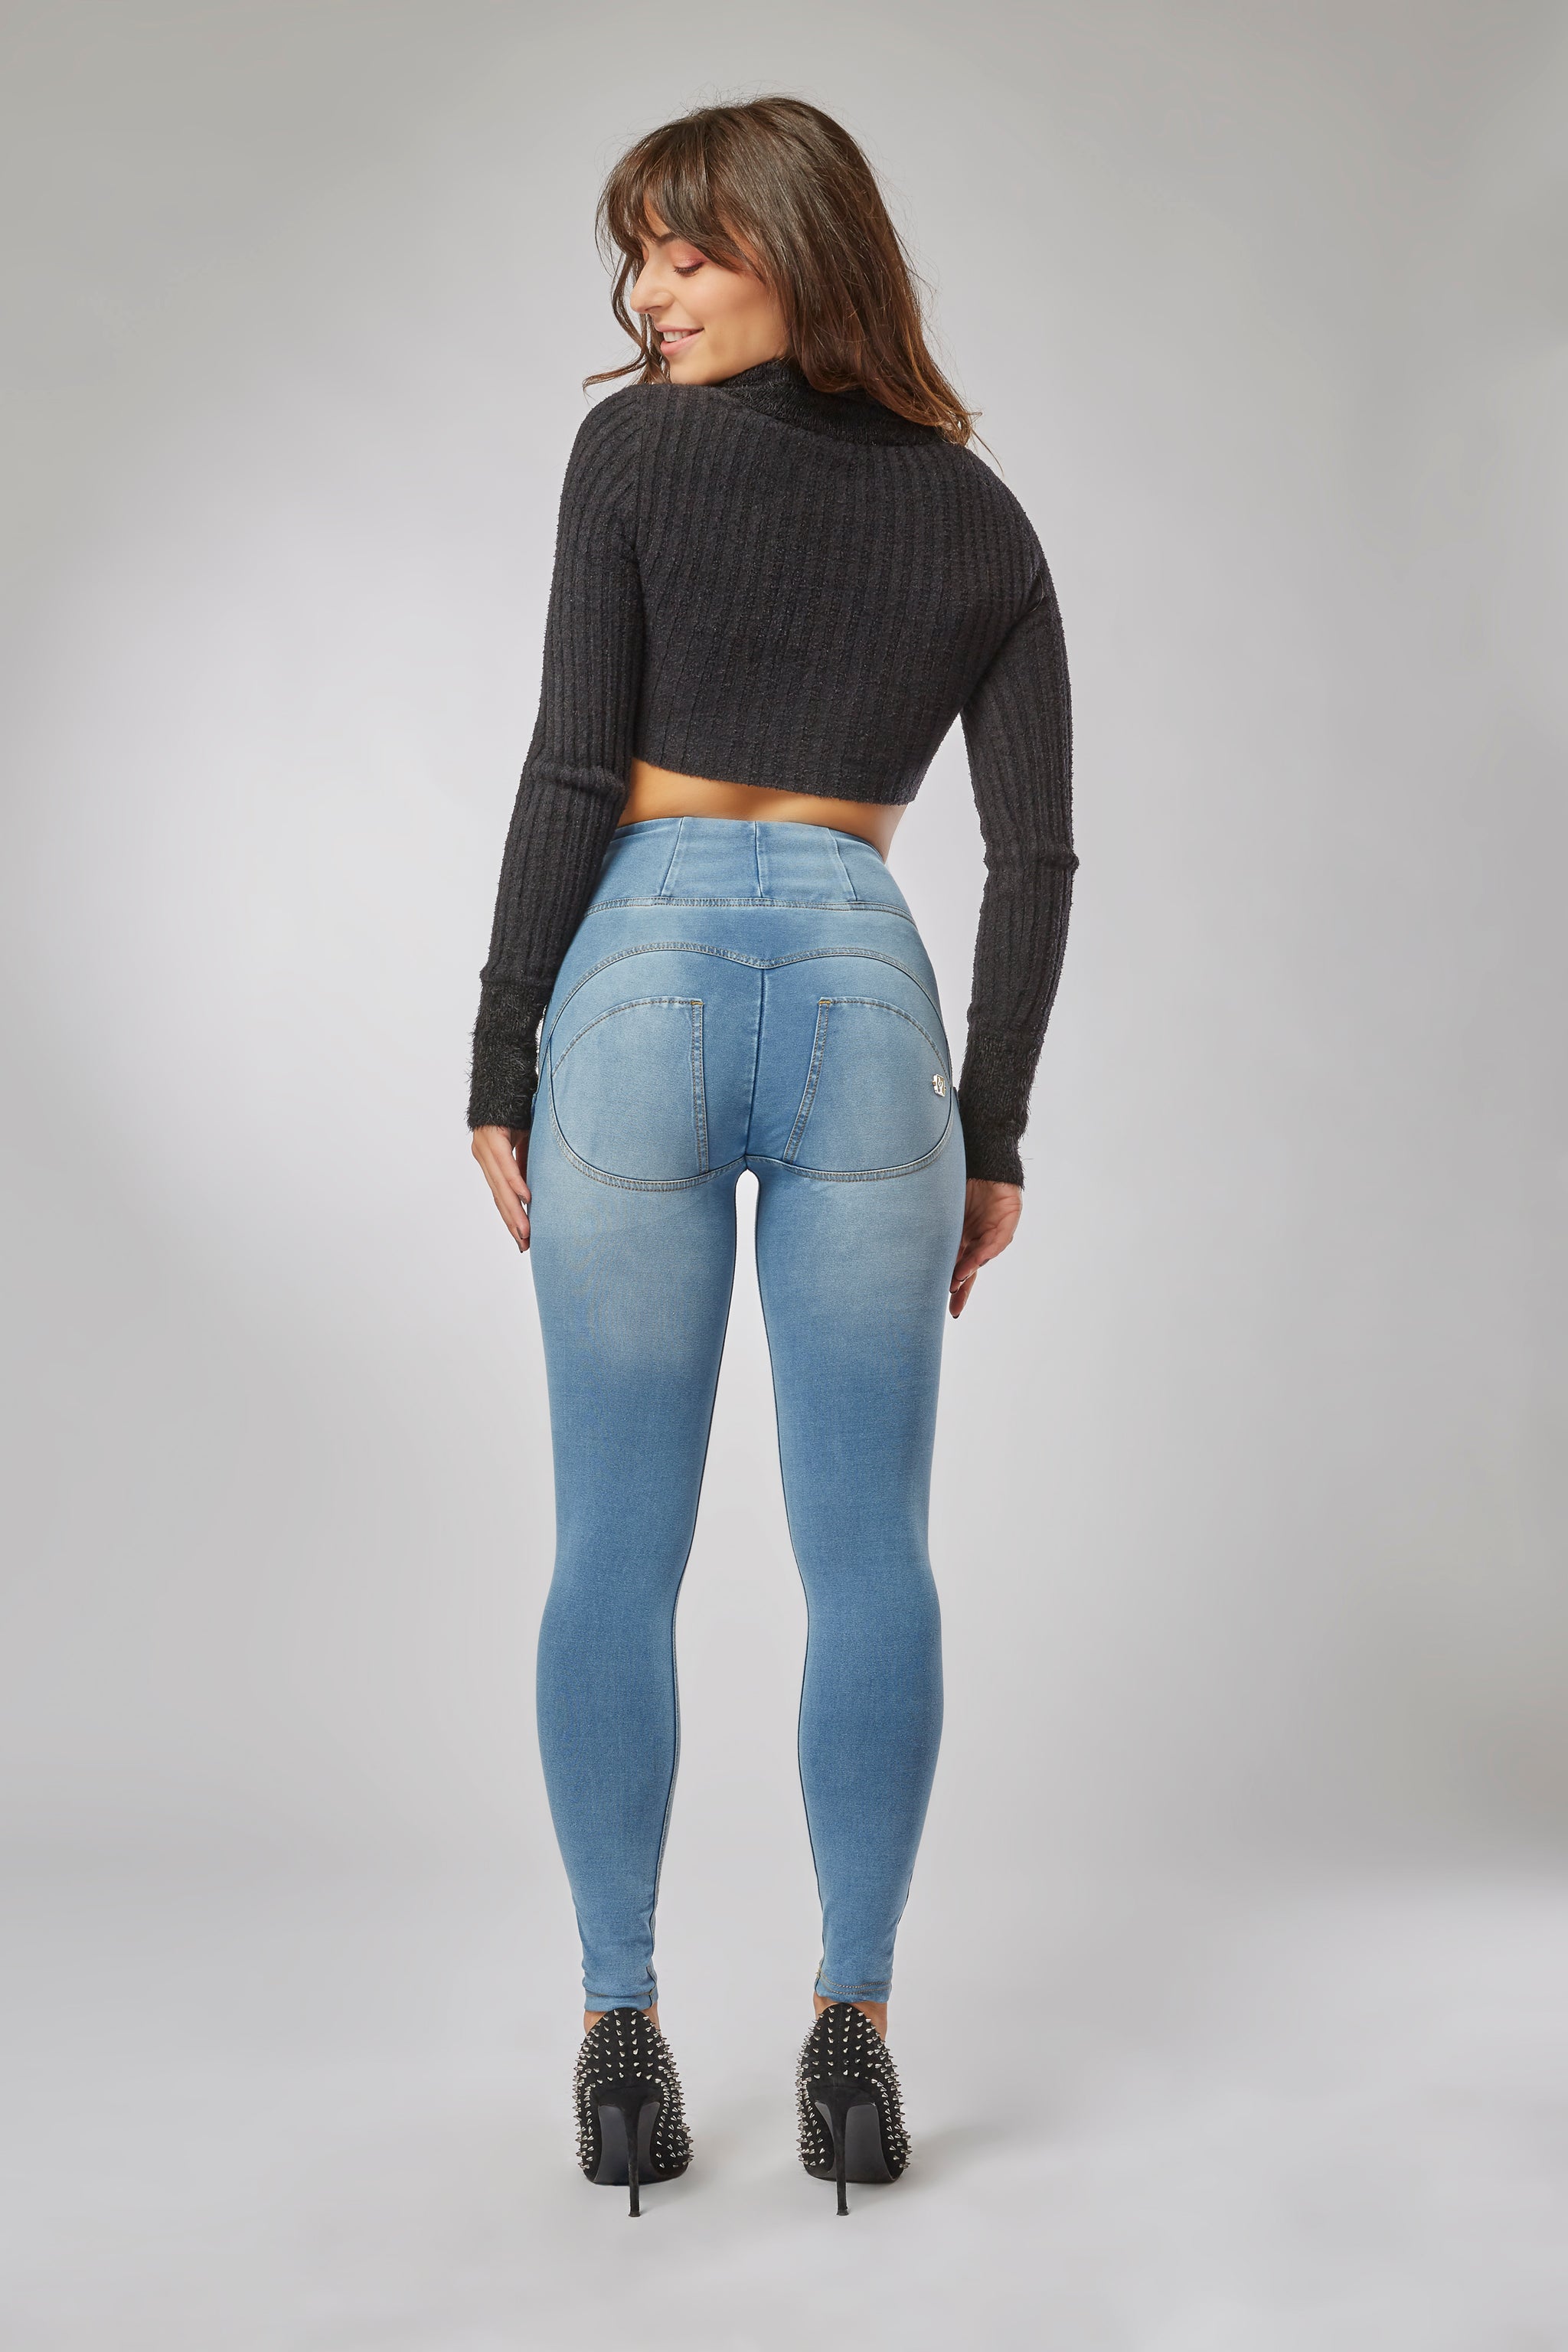 YMI Extreme Jeans Stretch Denim Leggings • The Fashionable Housewife